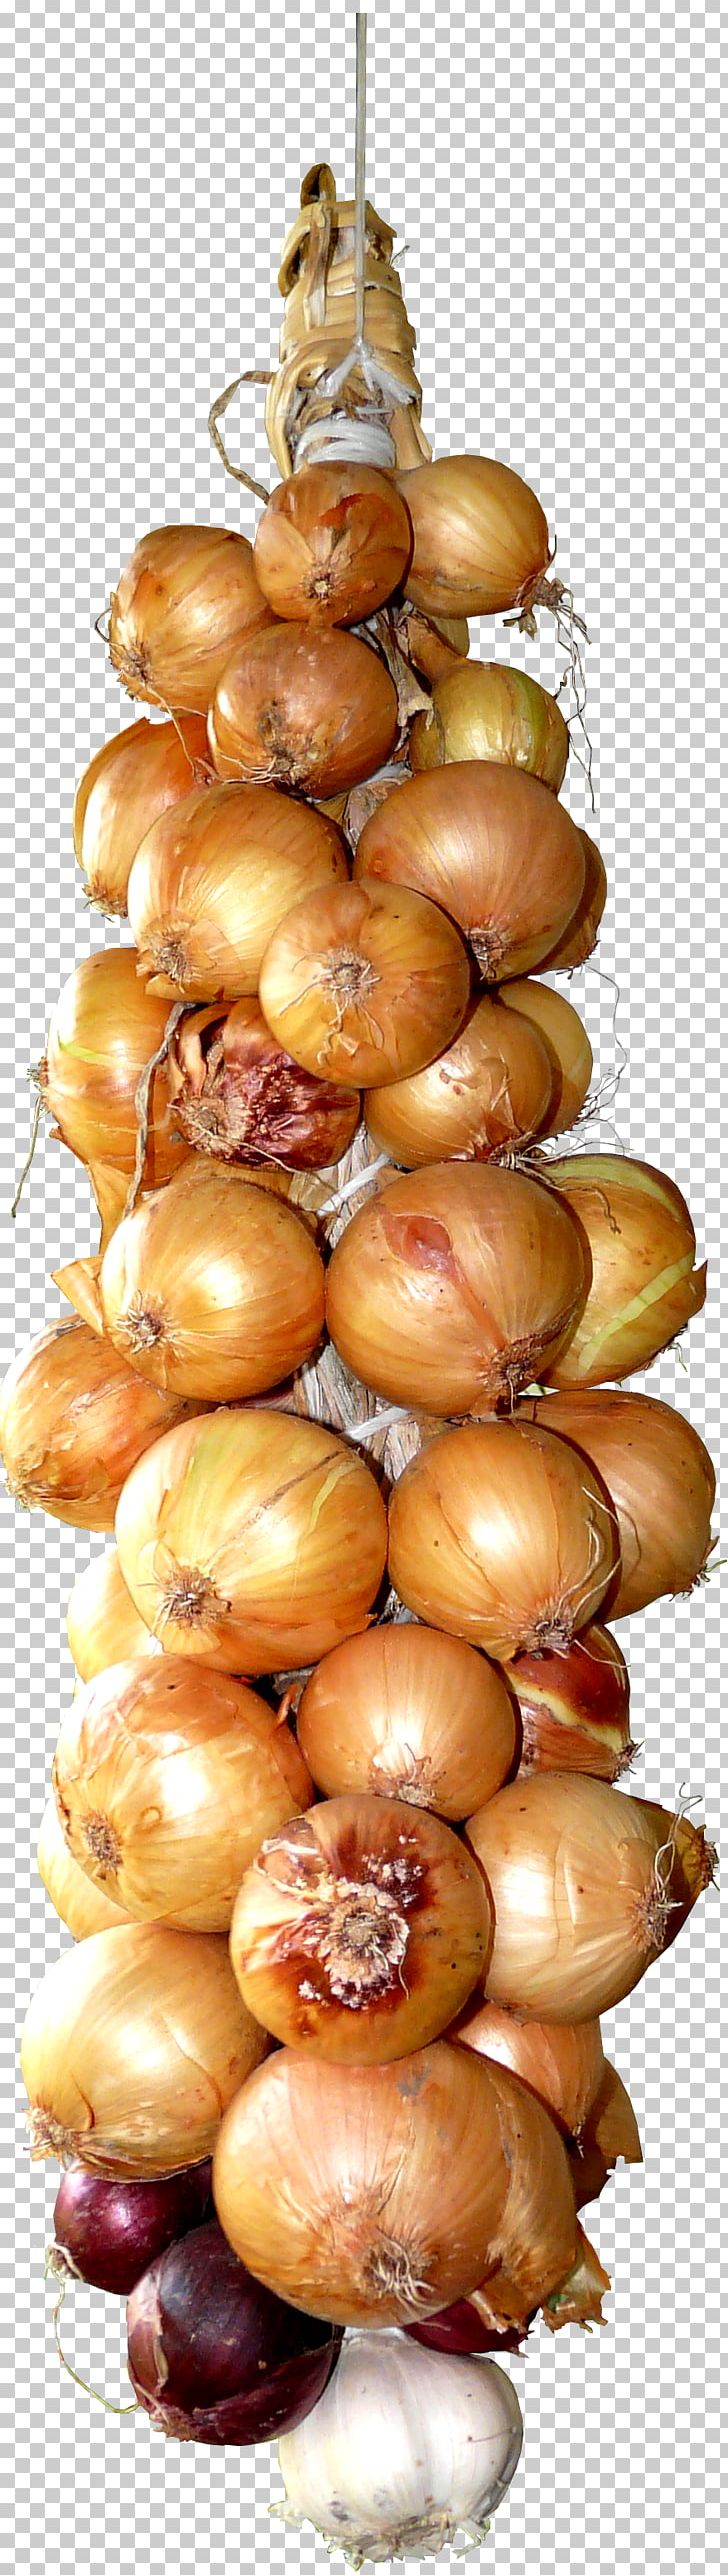 Garlic Onion Food Vegetable PNG, Clipart, Bread, Bunch, Bunch Of Garlic, Cartoon Garlic, Chili Garlic Free PNG Download